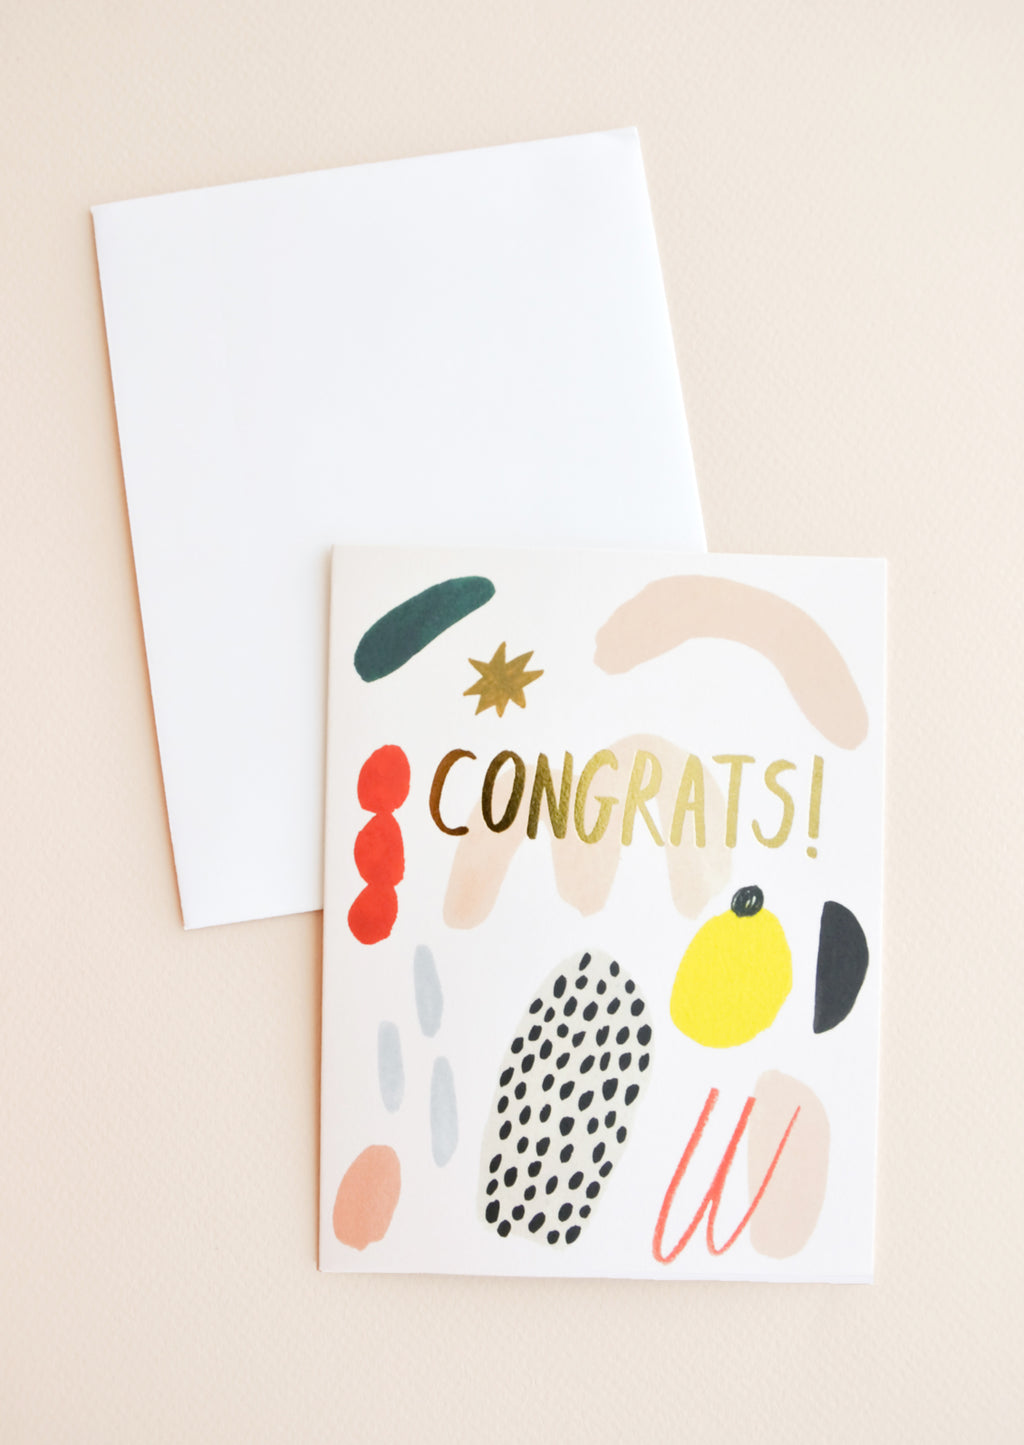 1: Notecard with colorful abstract shapes and the word "Congrats" in gold, and white envelope.